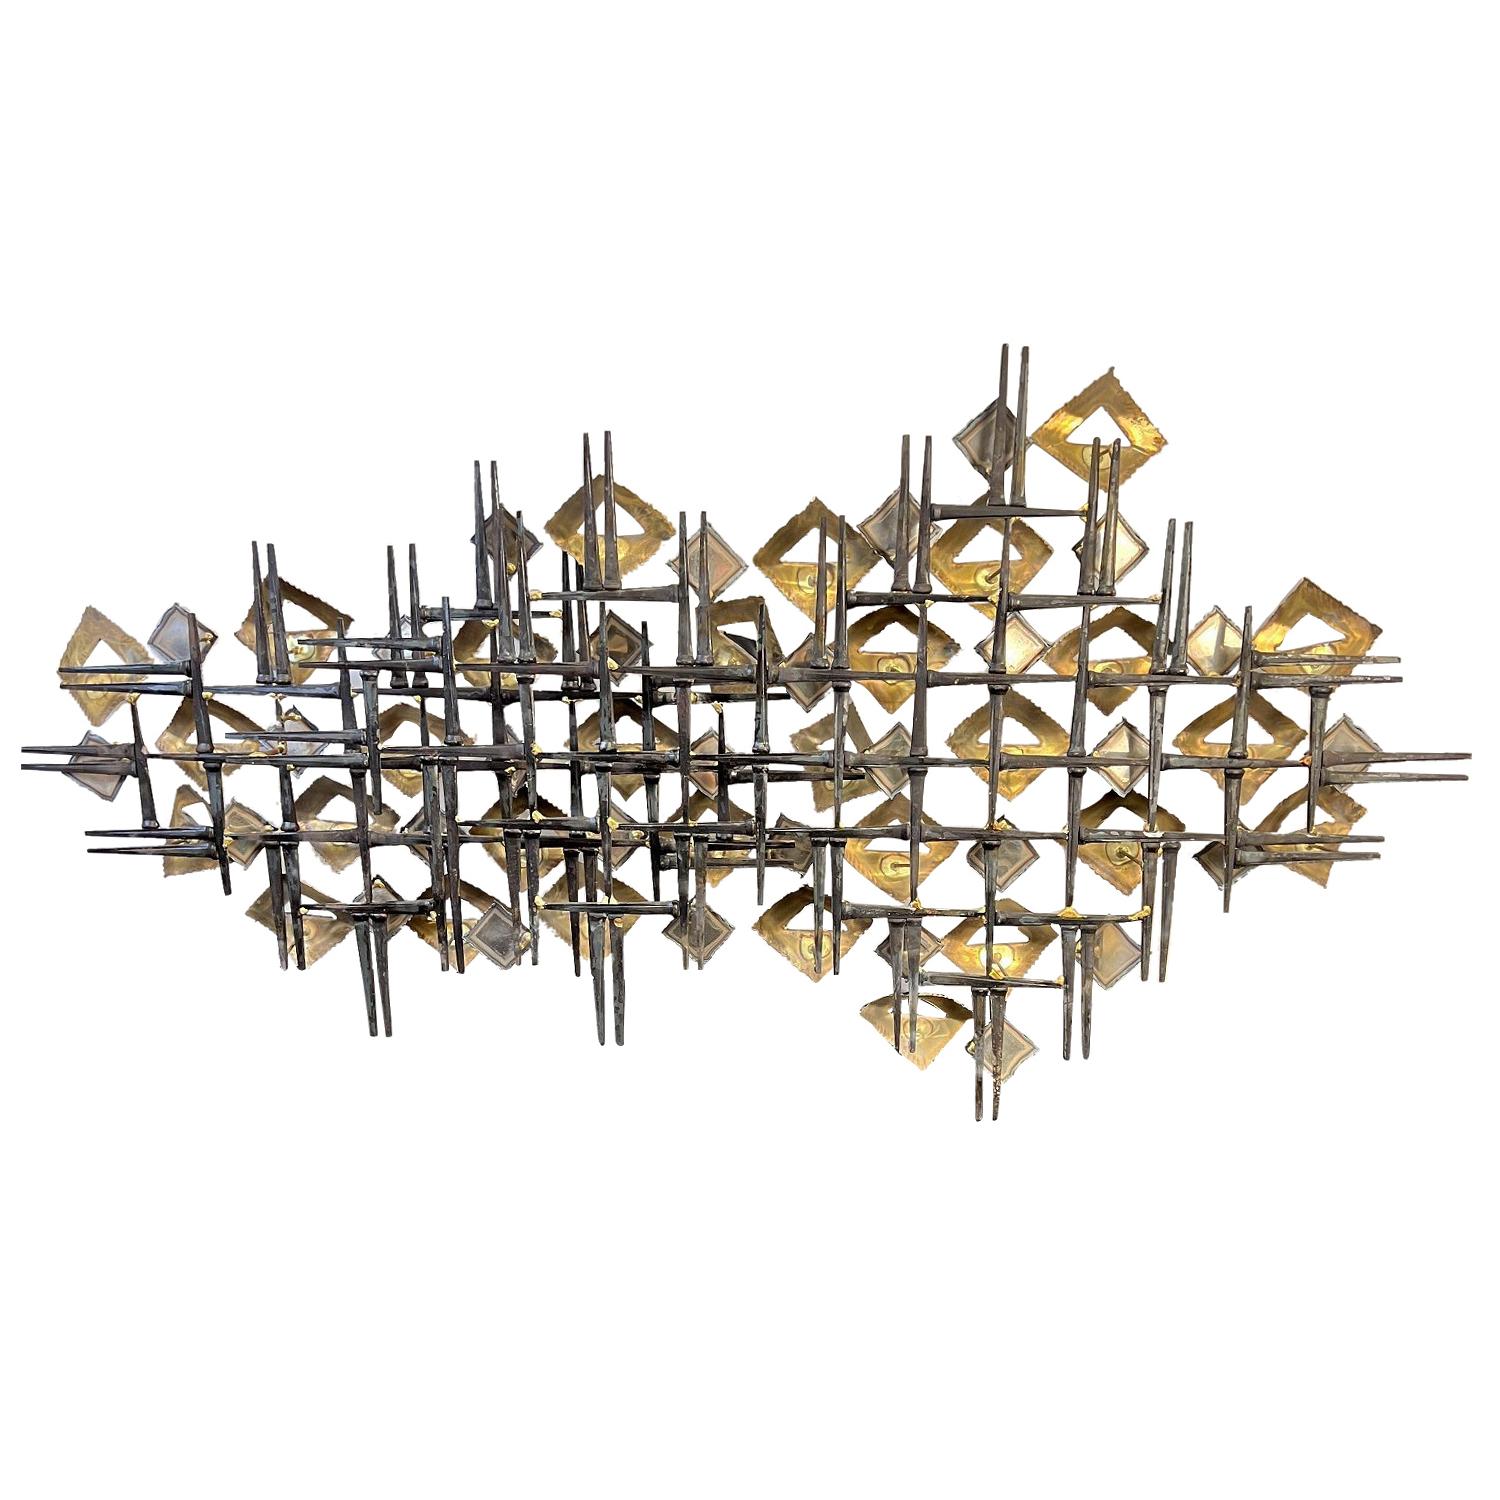 20th Century American Abstract Brutalist Metal Wall Sculpture by Linda Casetti For Sale 2